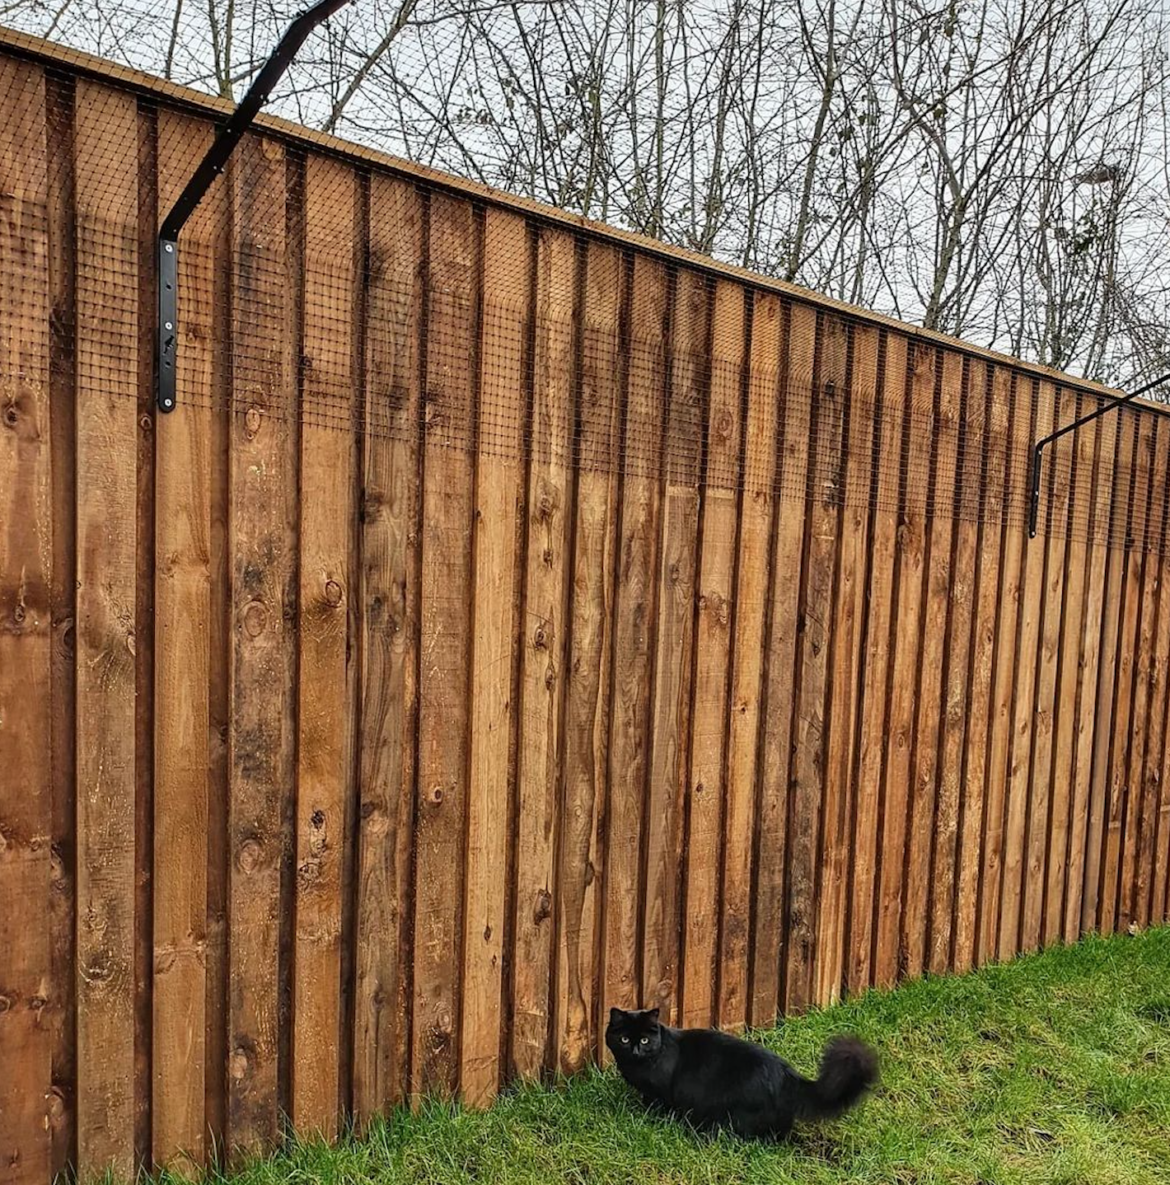 How High Does a Cat Fence Need To Be?